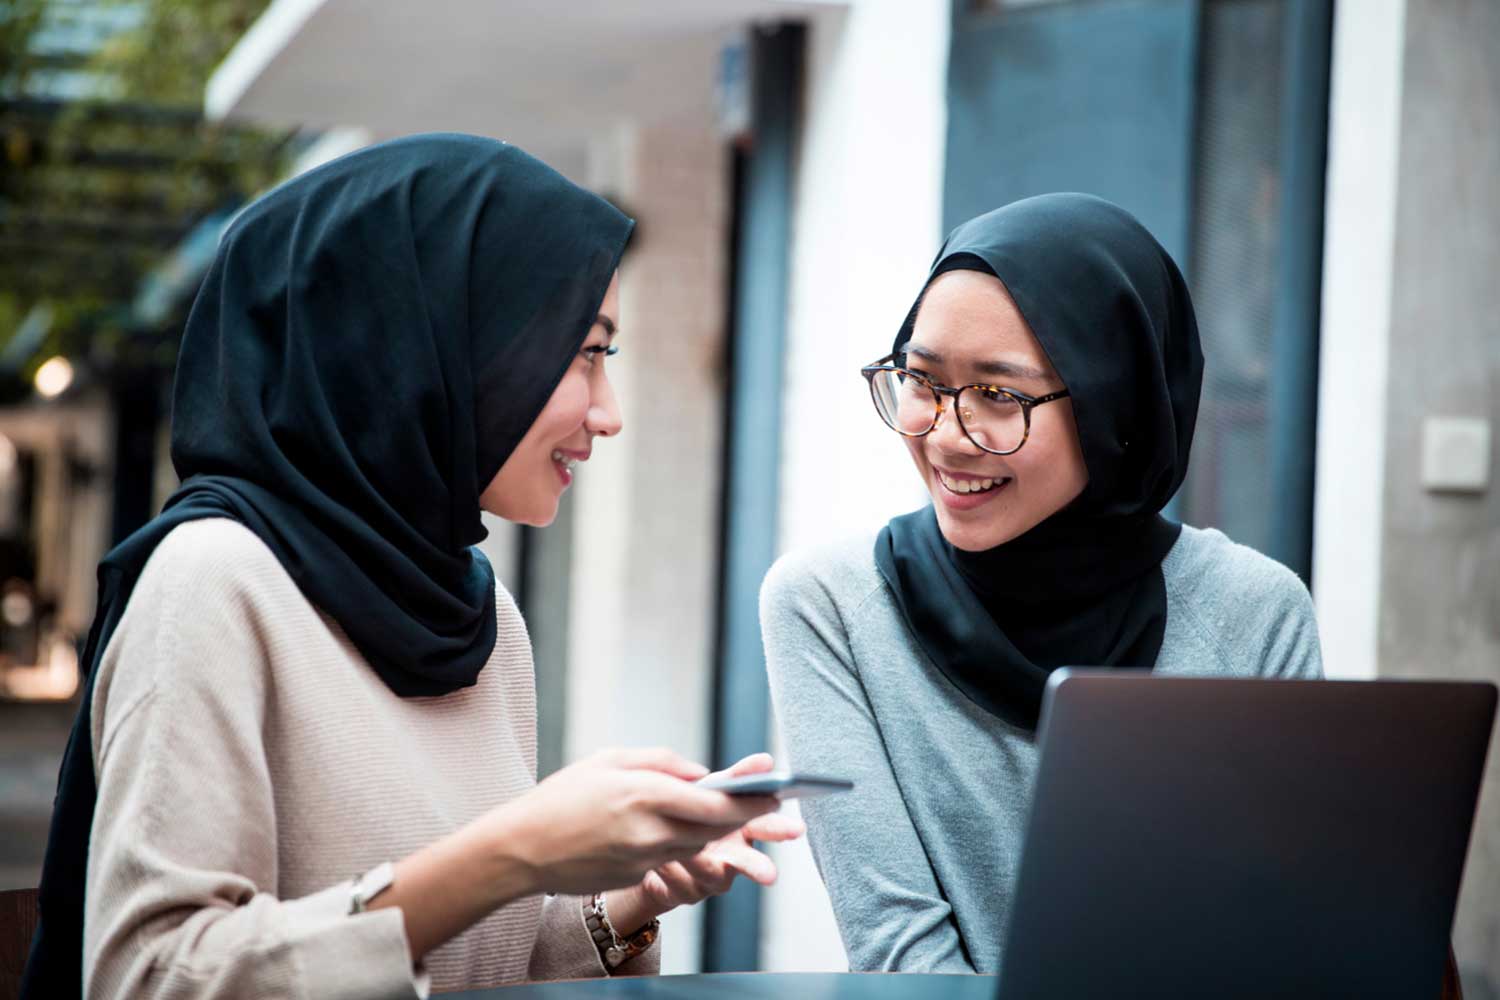 Two young people wearing head scarves sit interacting with one another, one on a smartphone and the other on a laptop computer.